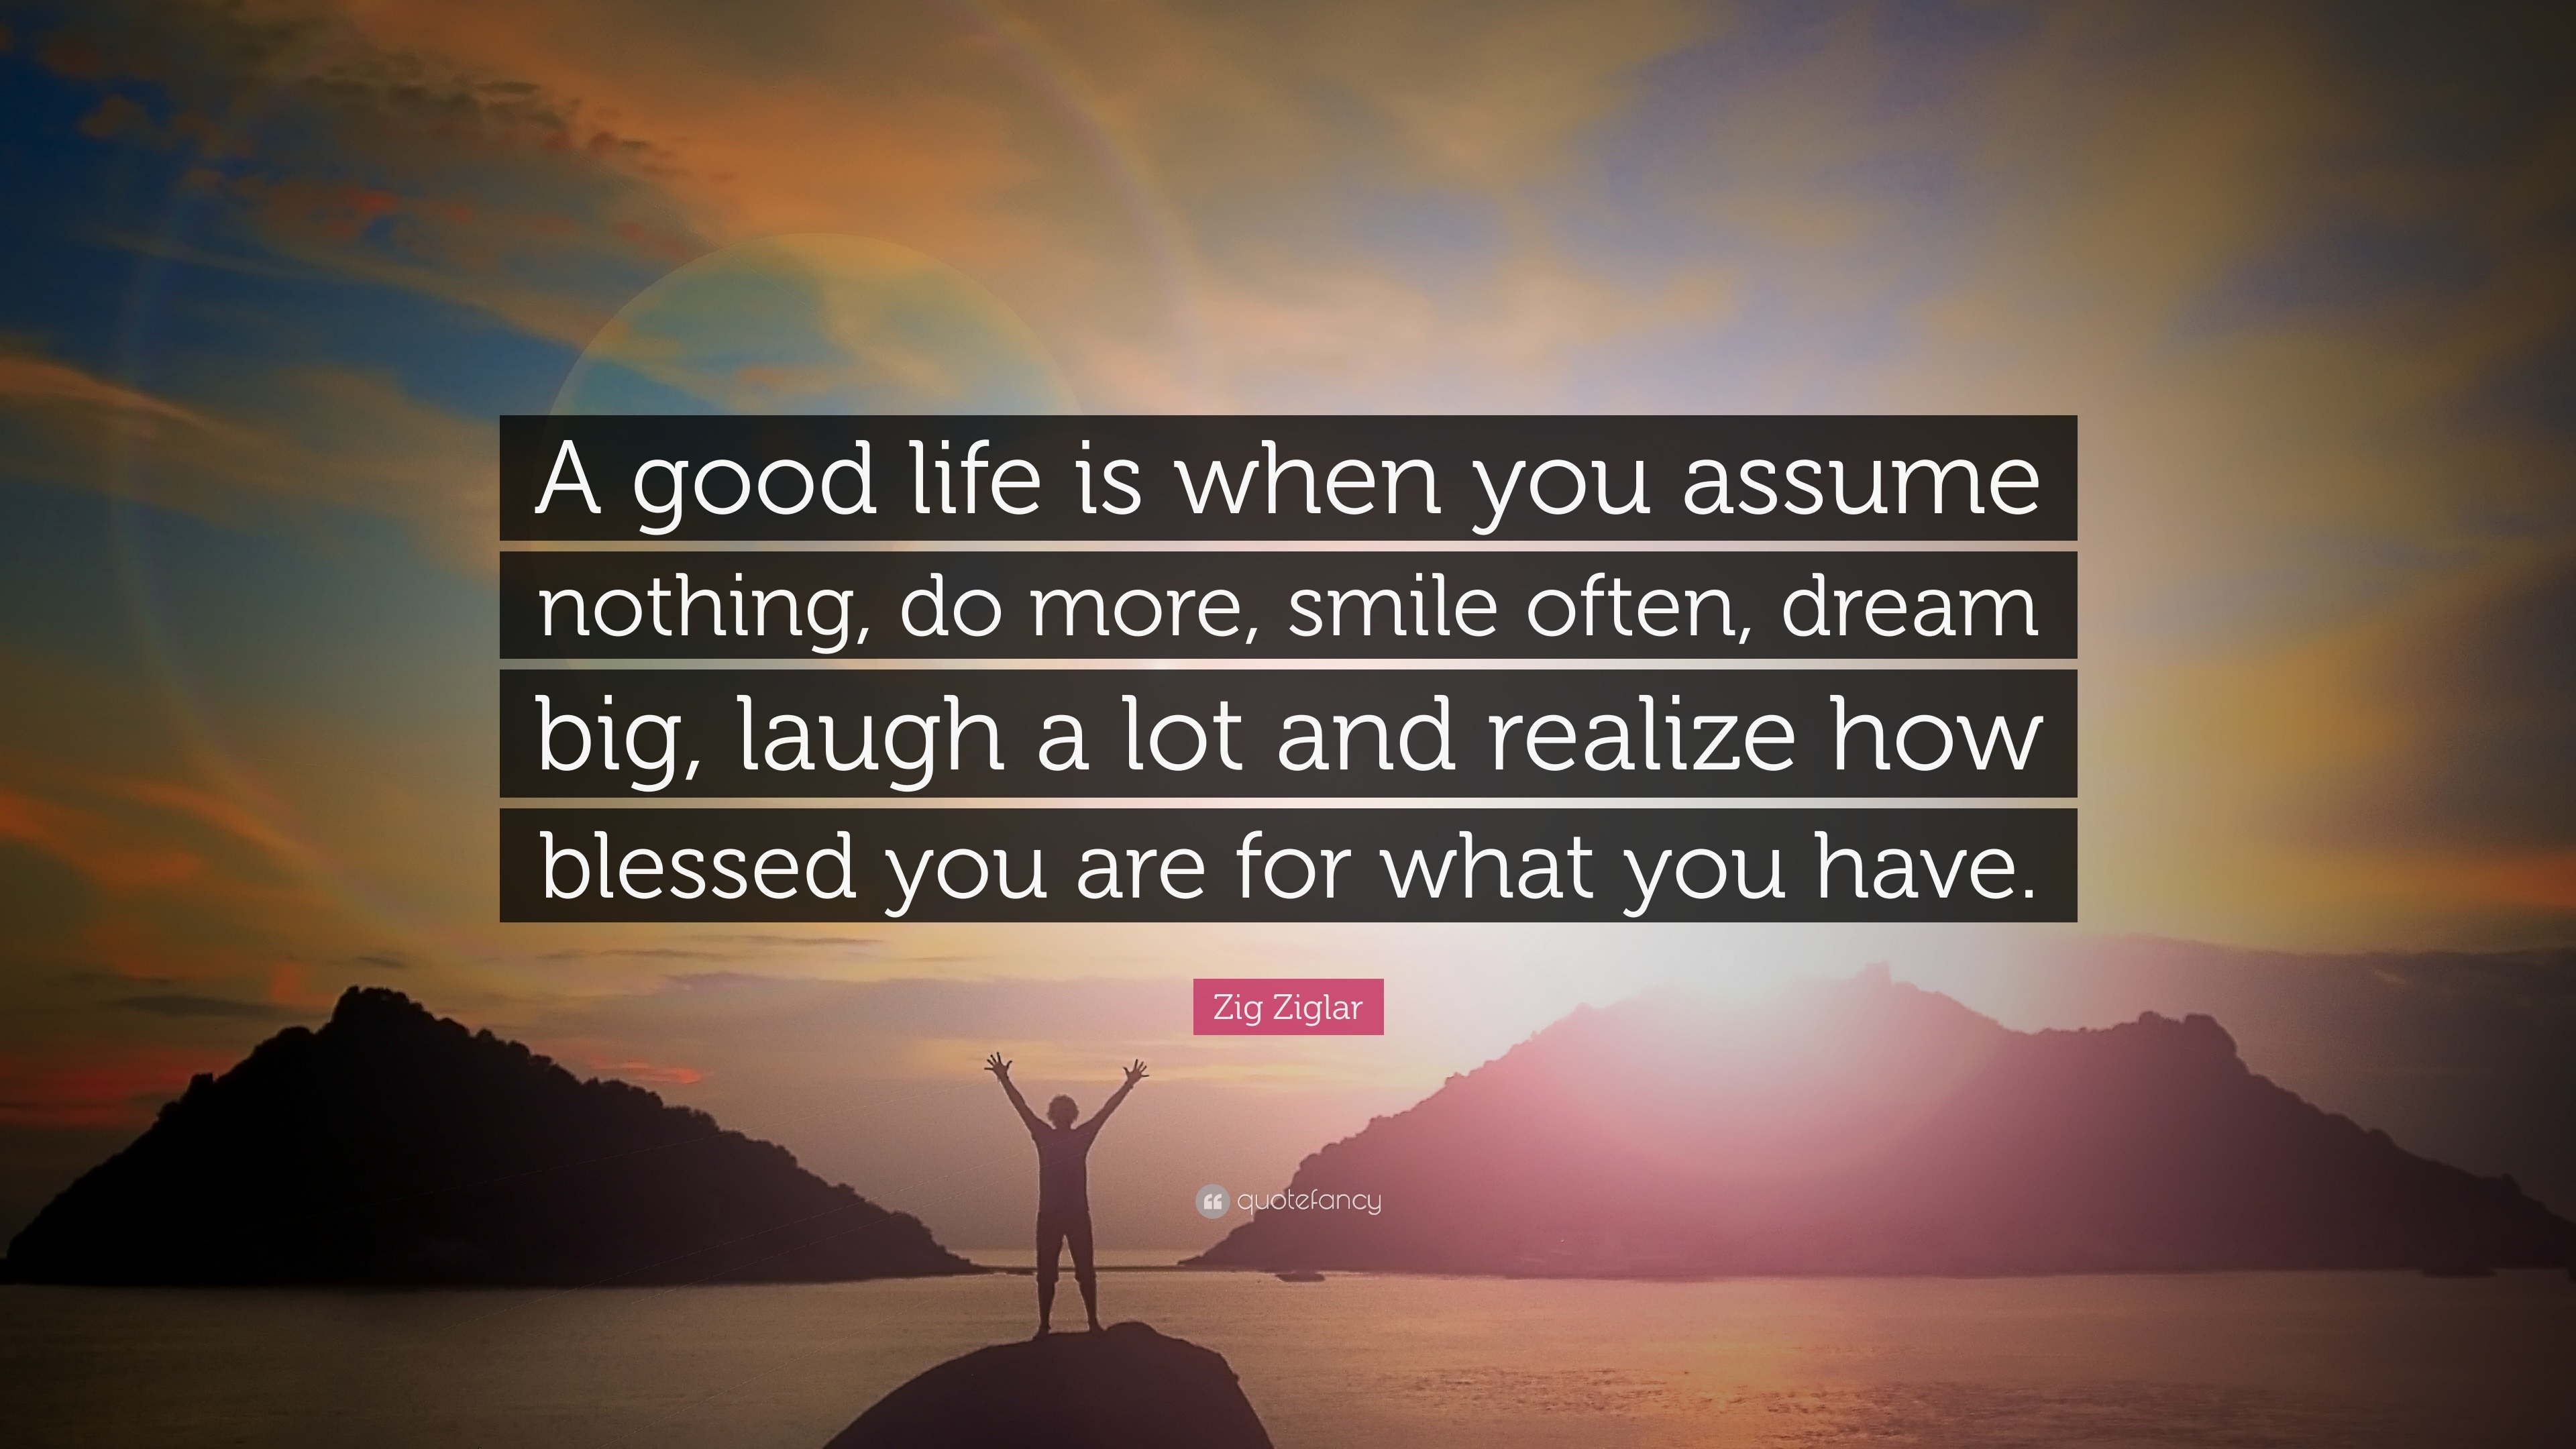 Zig Ziglar Quote: “A good life is when you assume nothing, do more